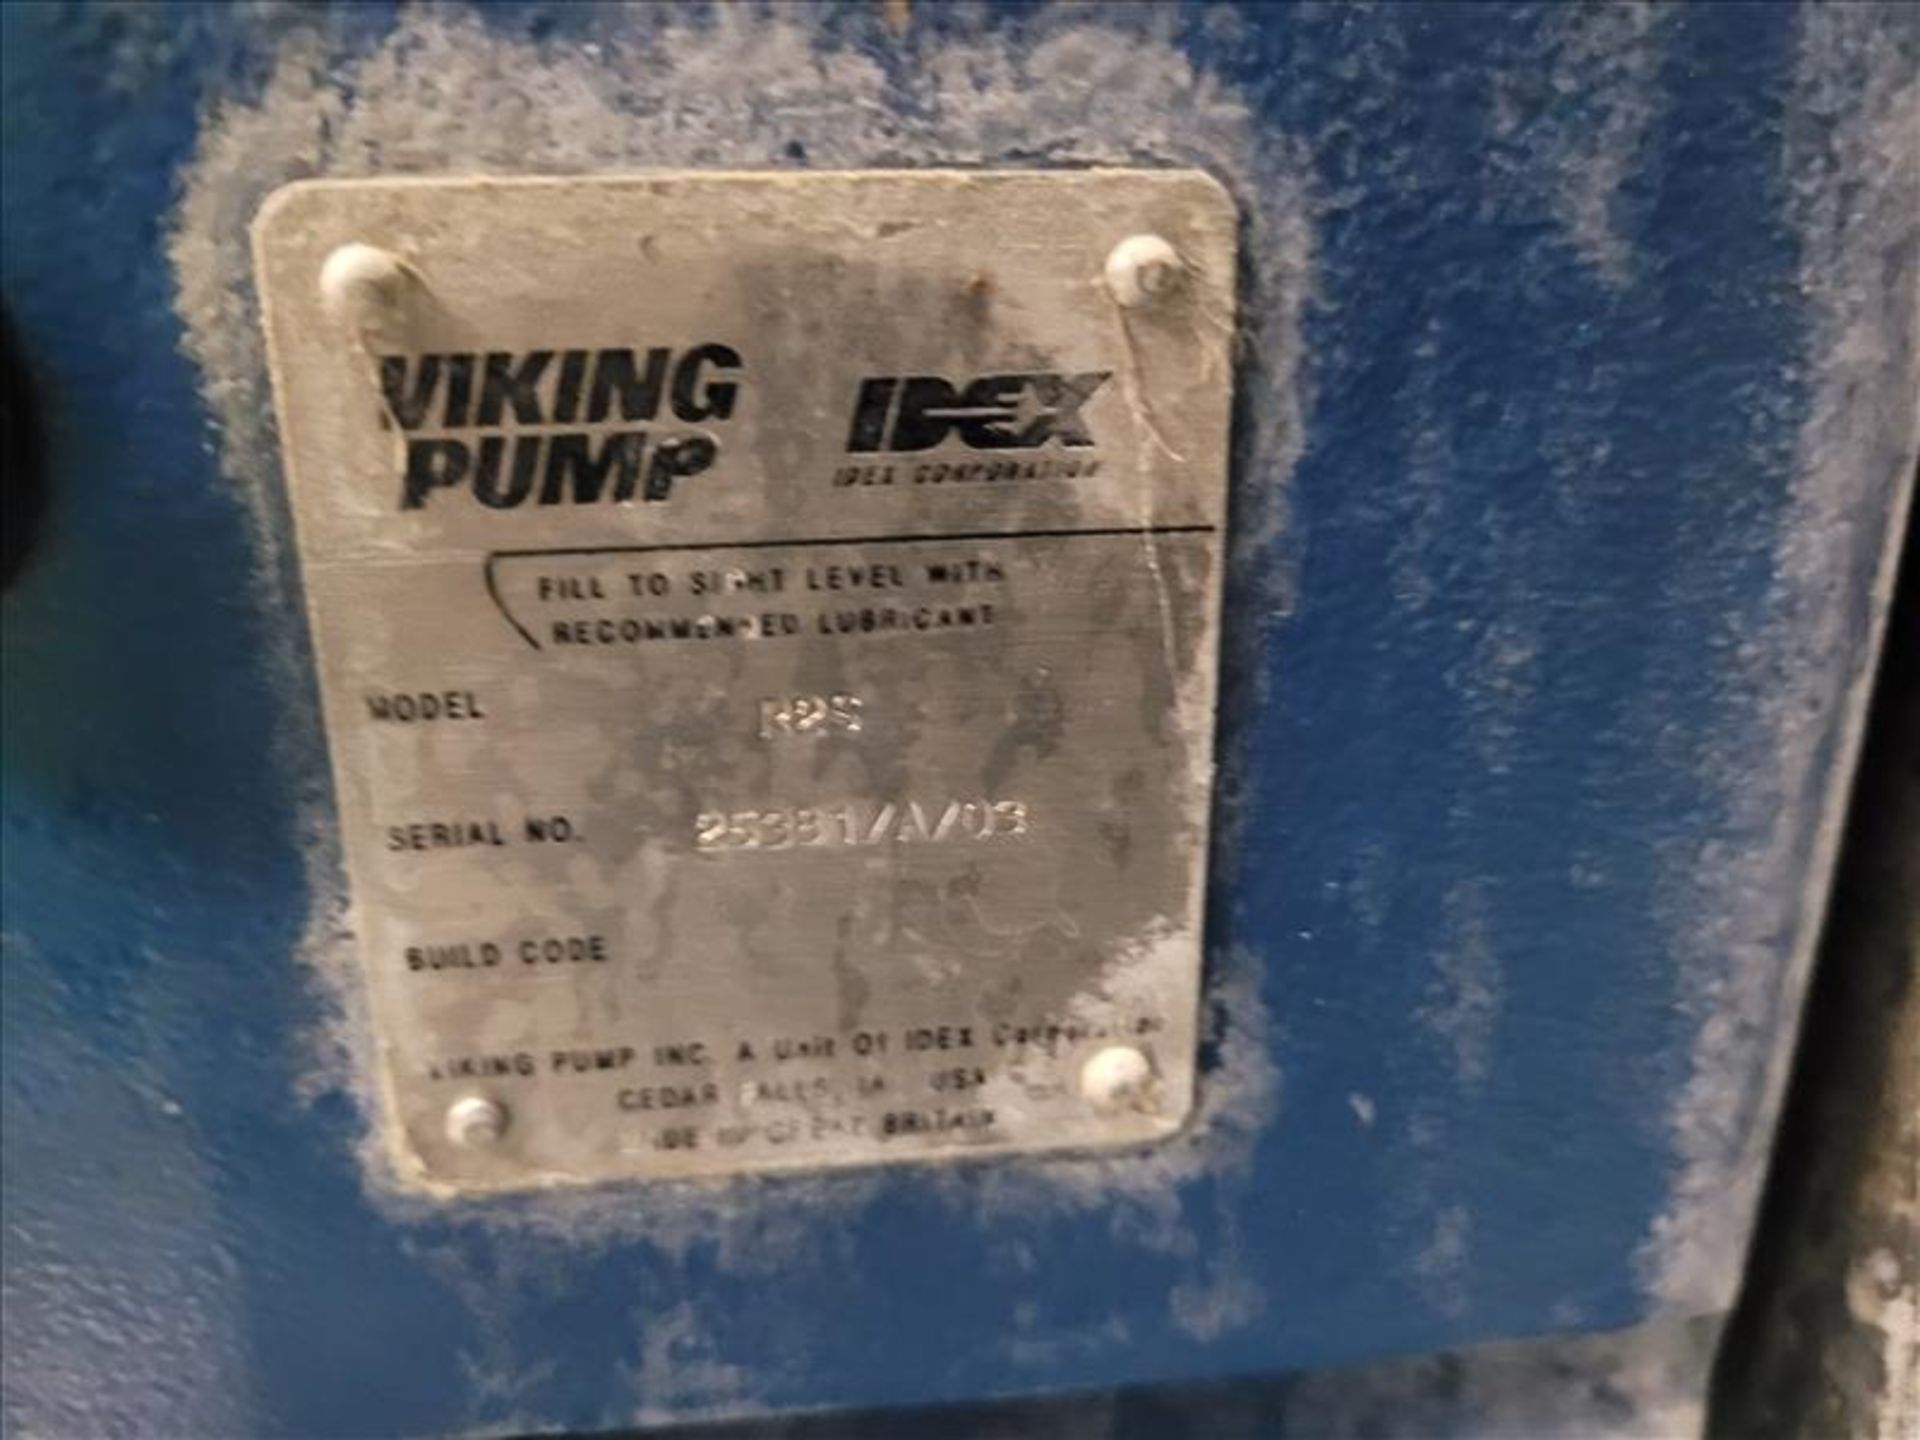 VIKING 2 hp Positive Displacement Pump, mod. RS2, ser. 25381/A/03, with SEW 1740 RPM, Mounted on S/S - Image 2 of 4